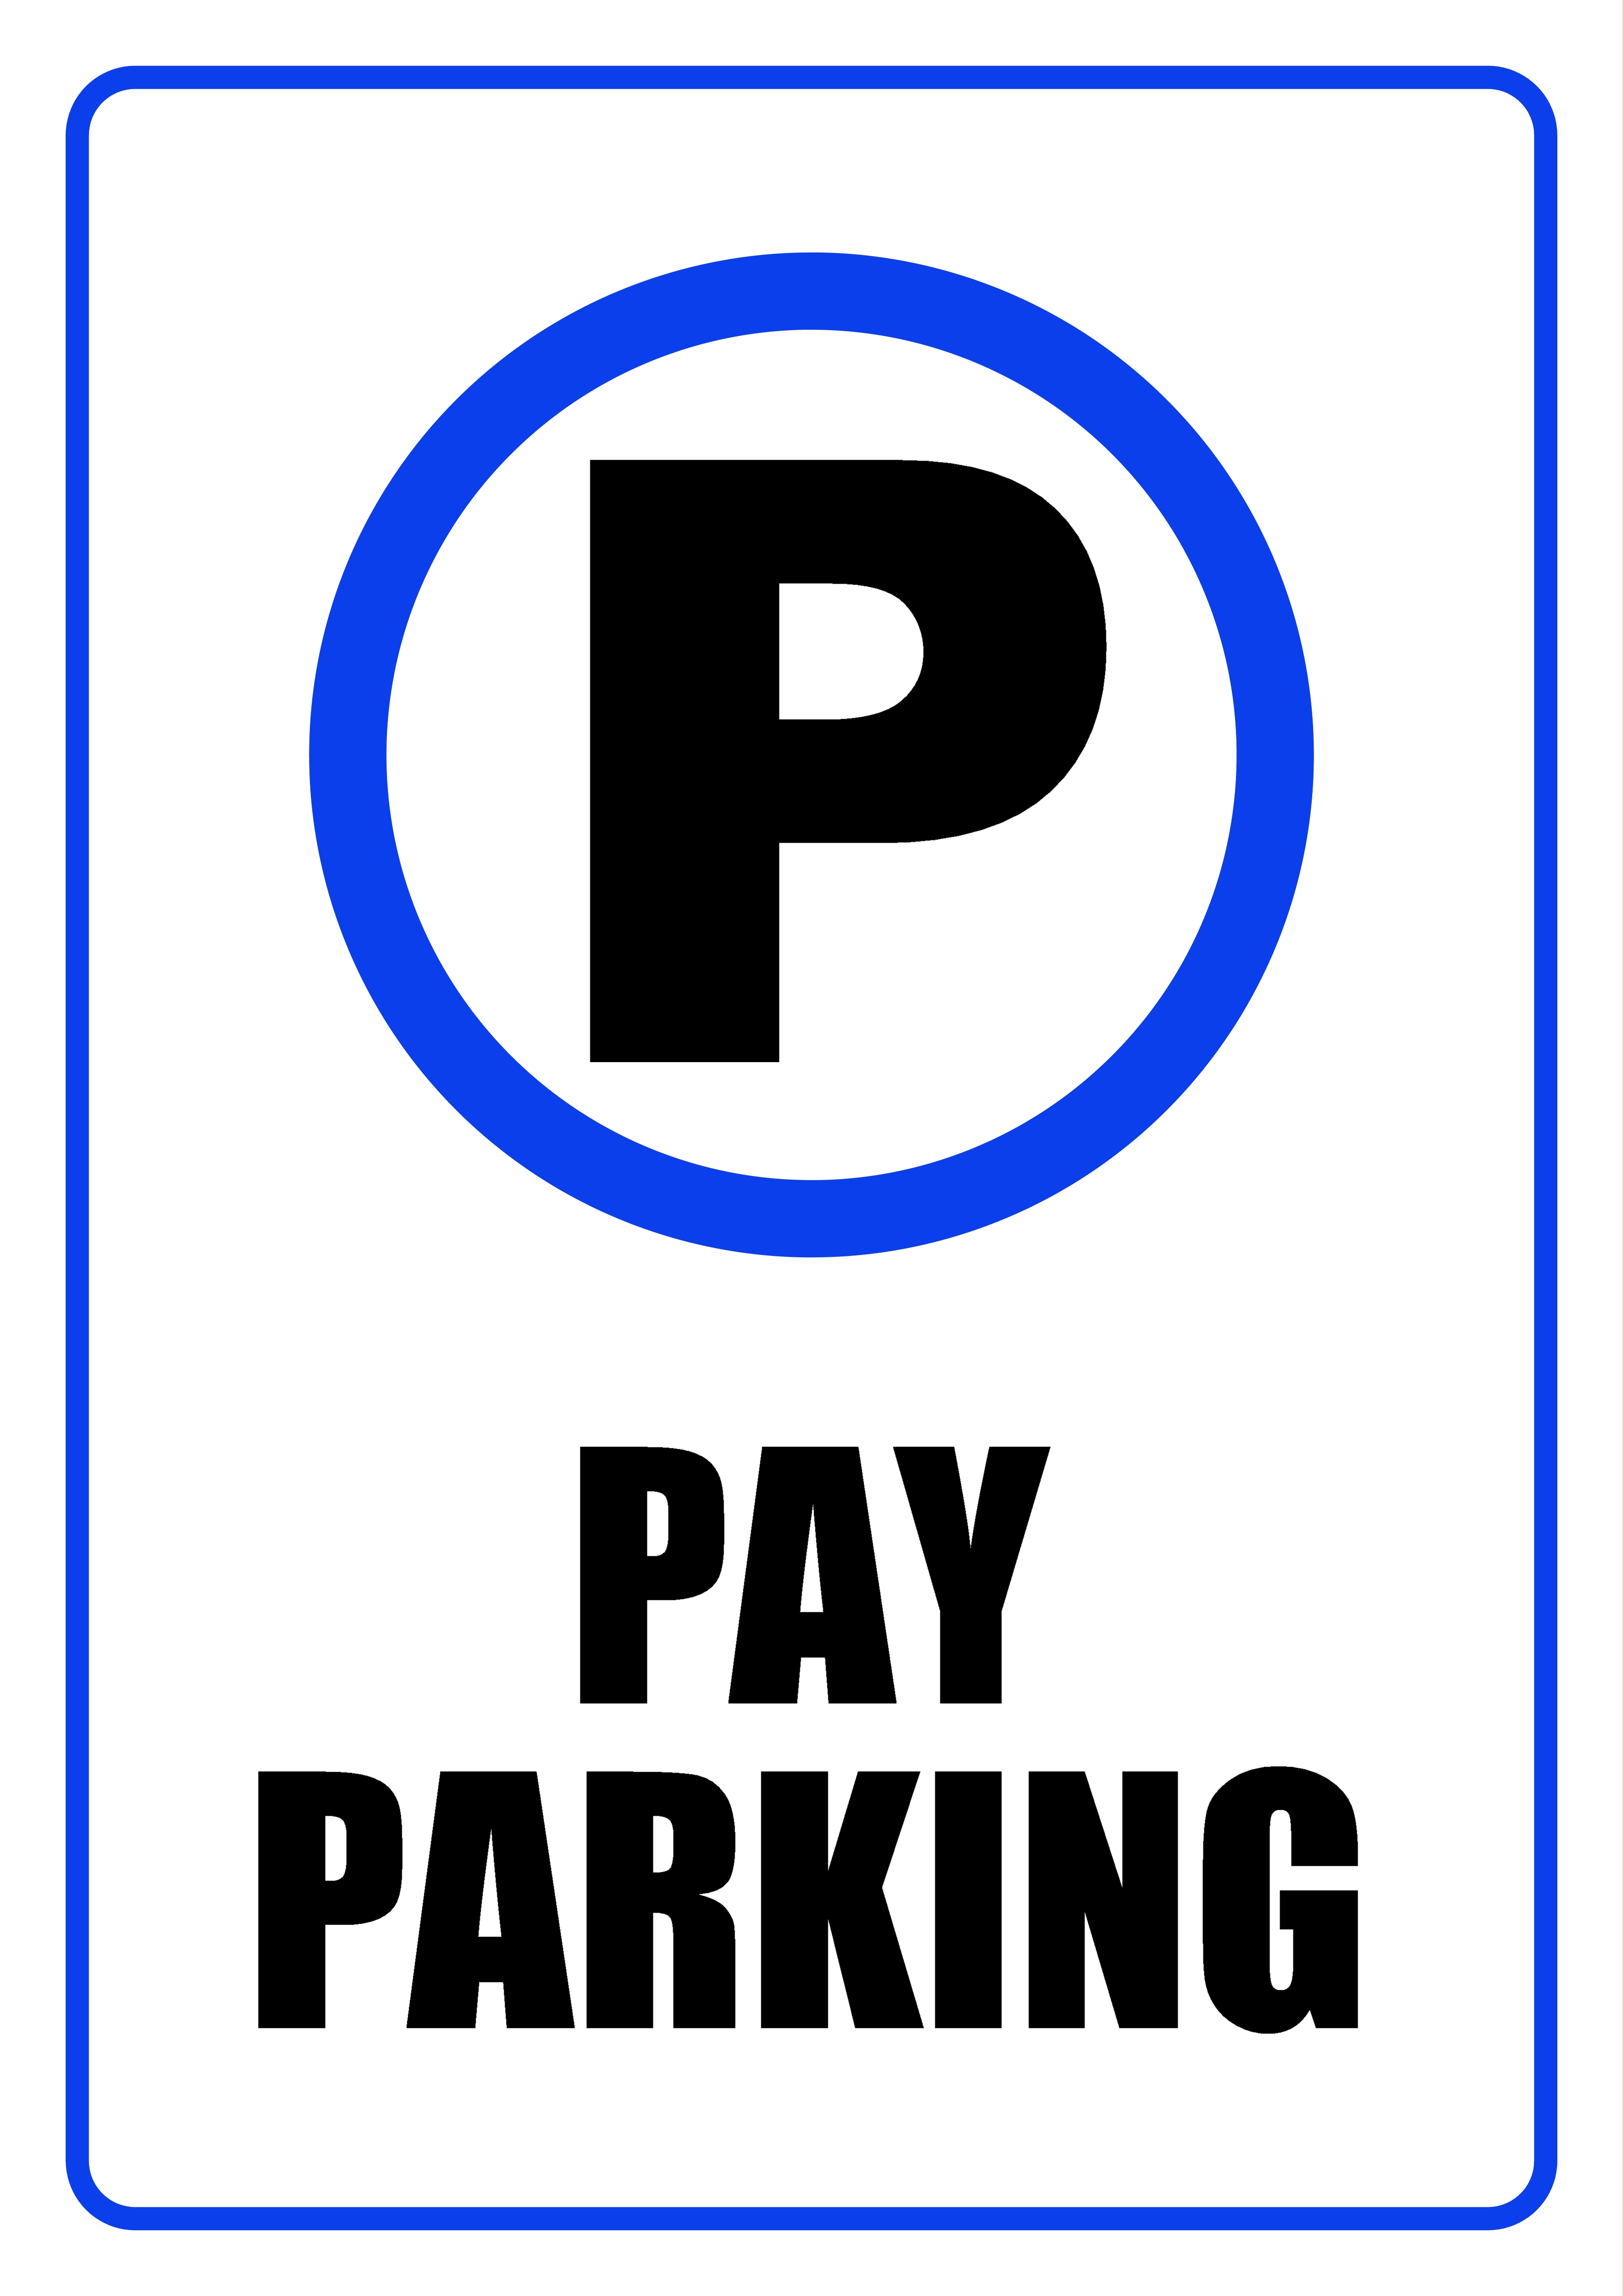 Pay Parking Zone - Sign, Black, Blue, Parking, Pay, HQ Photo